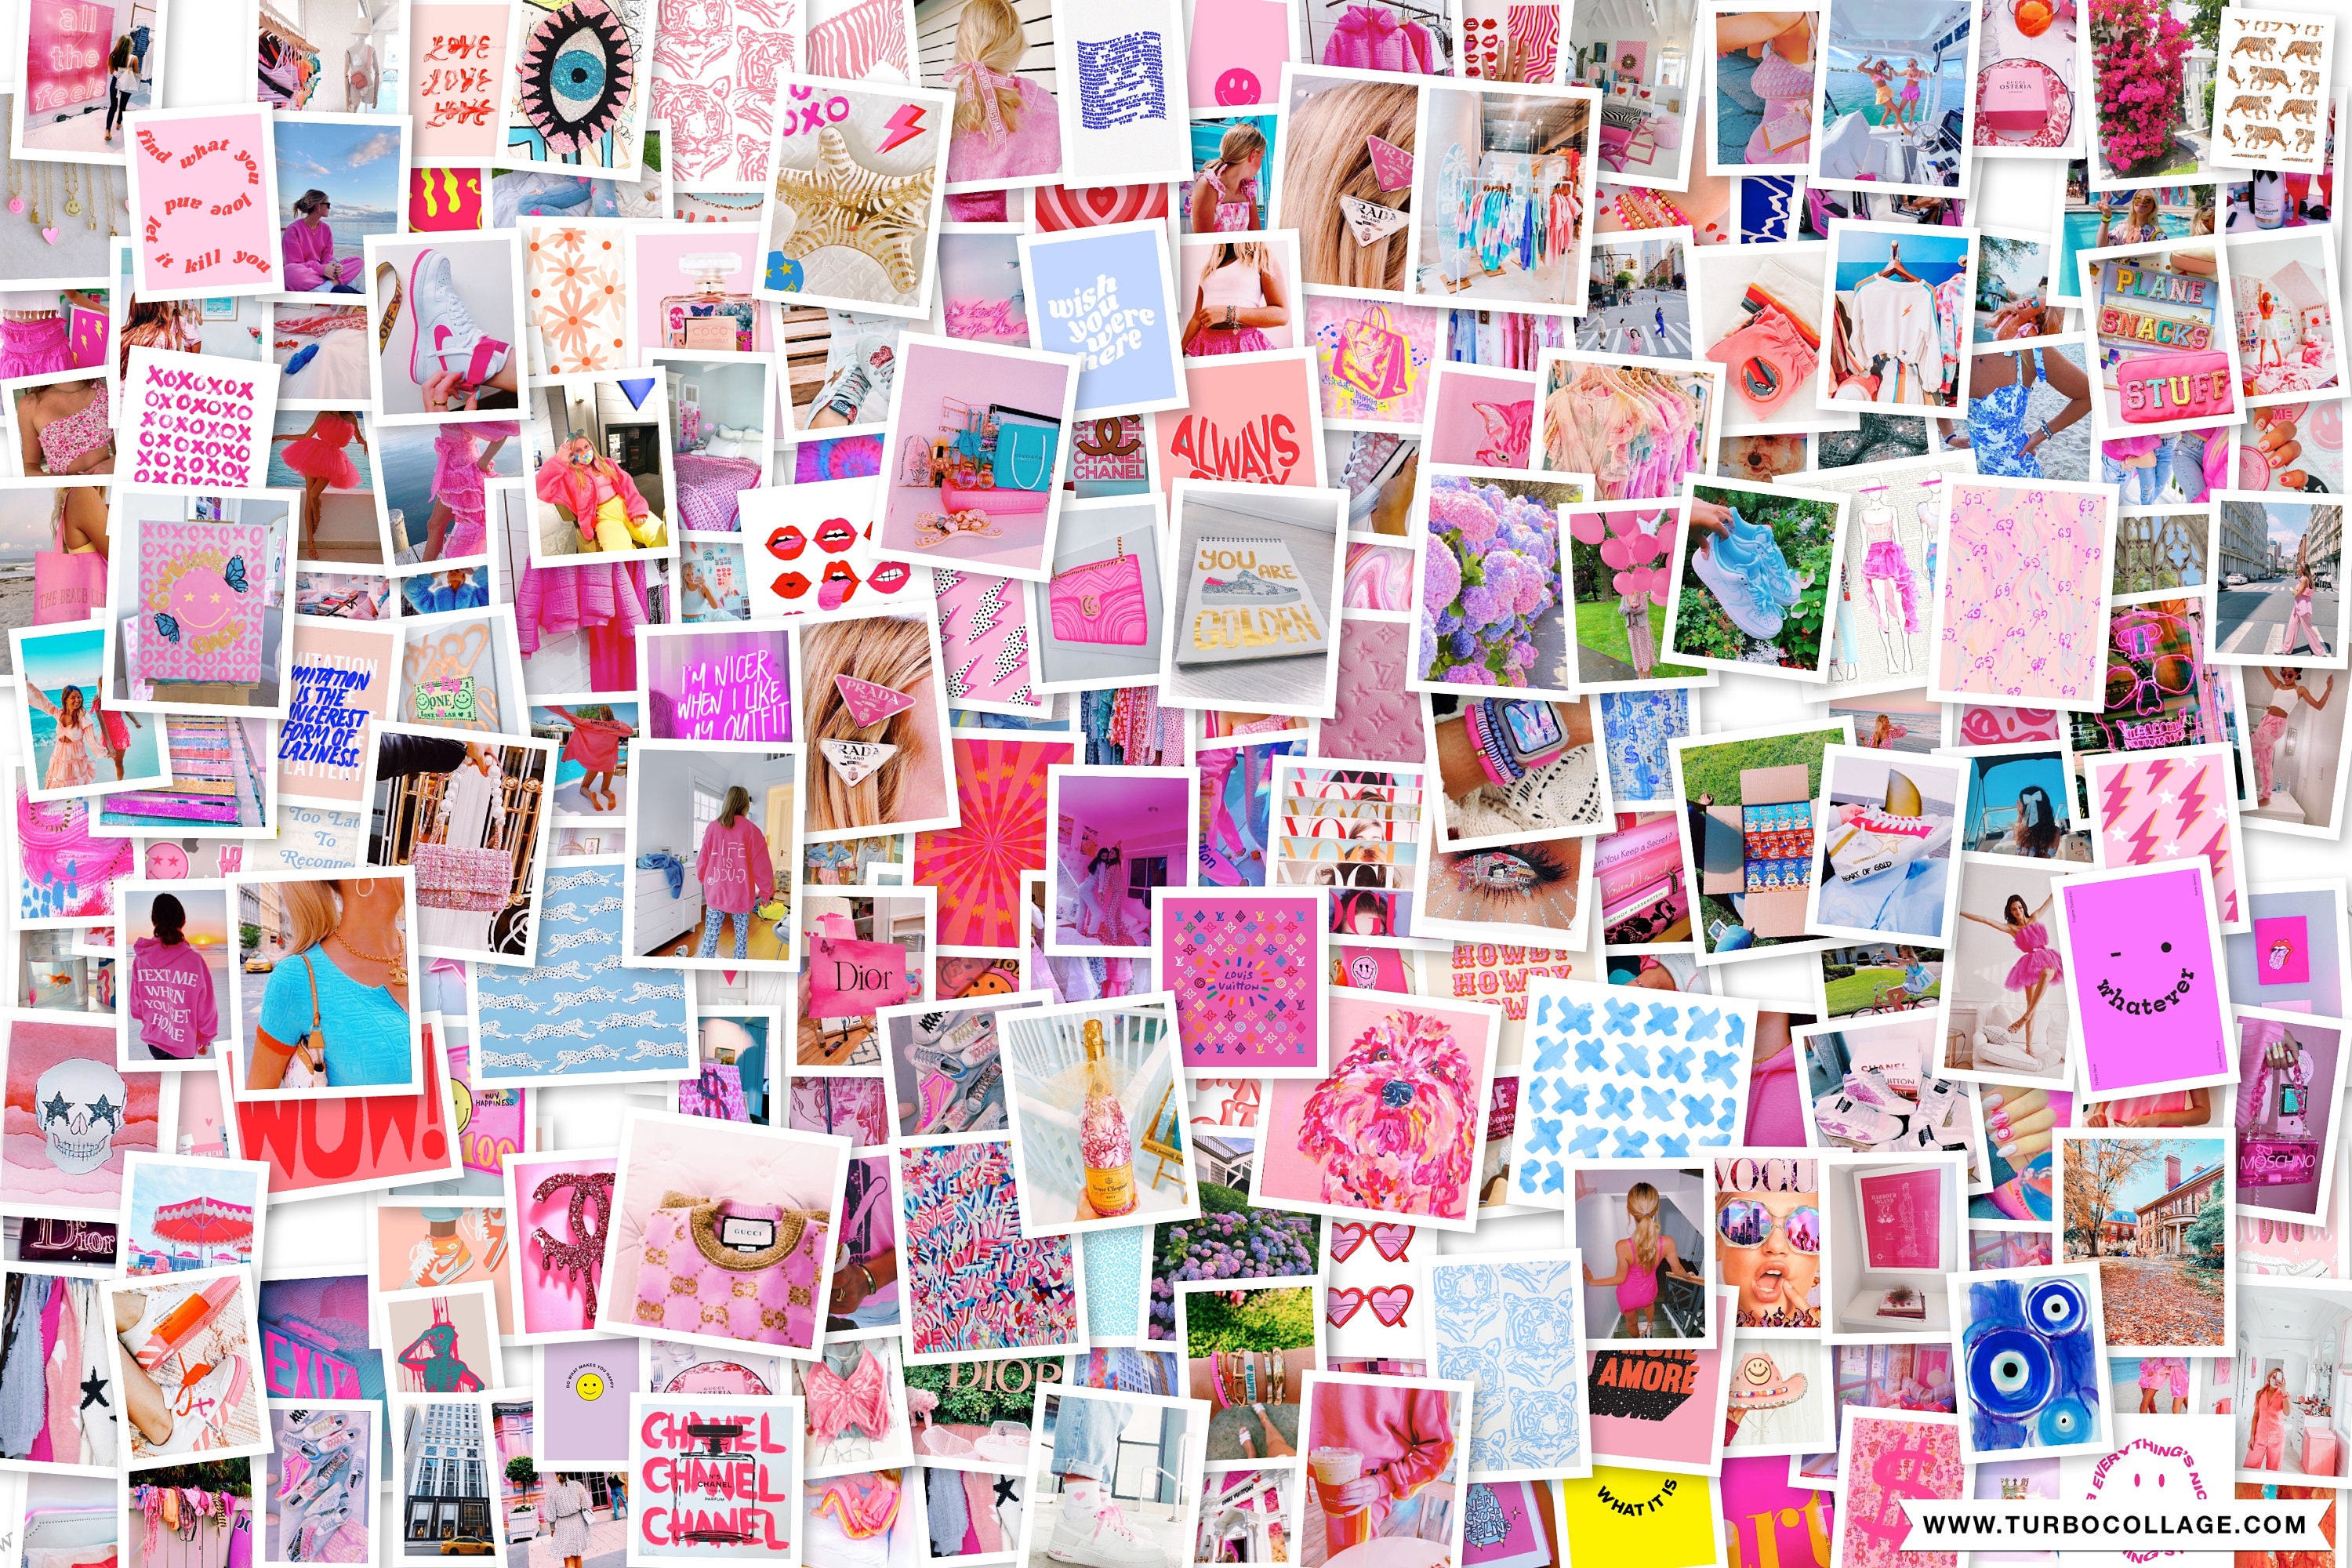 Download Pink Themed Luxury Brand Preppy PFP Collage Wallpaper